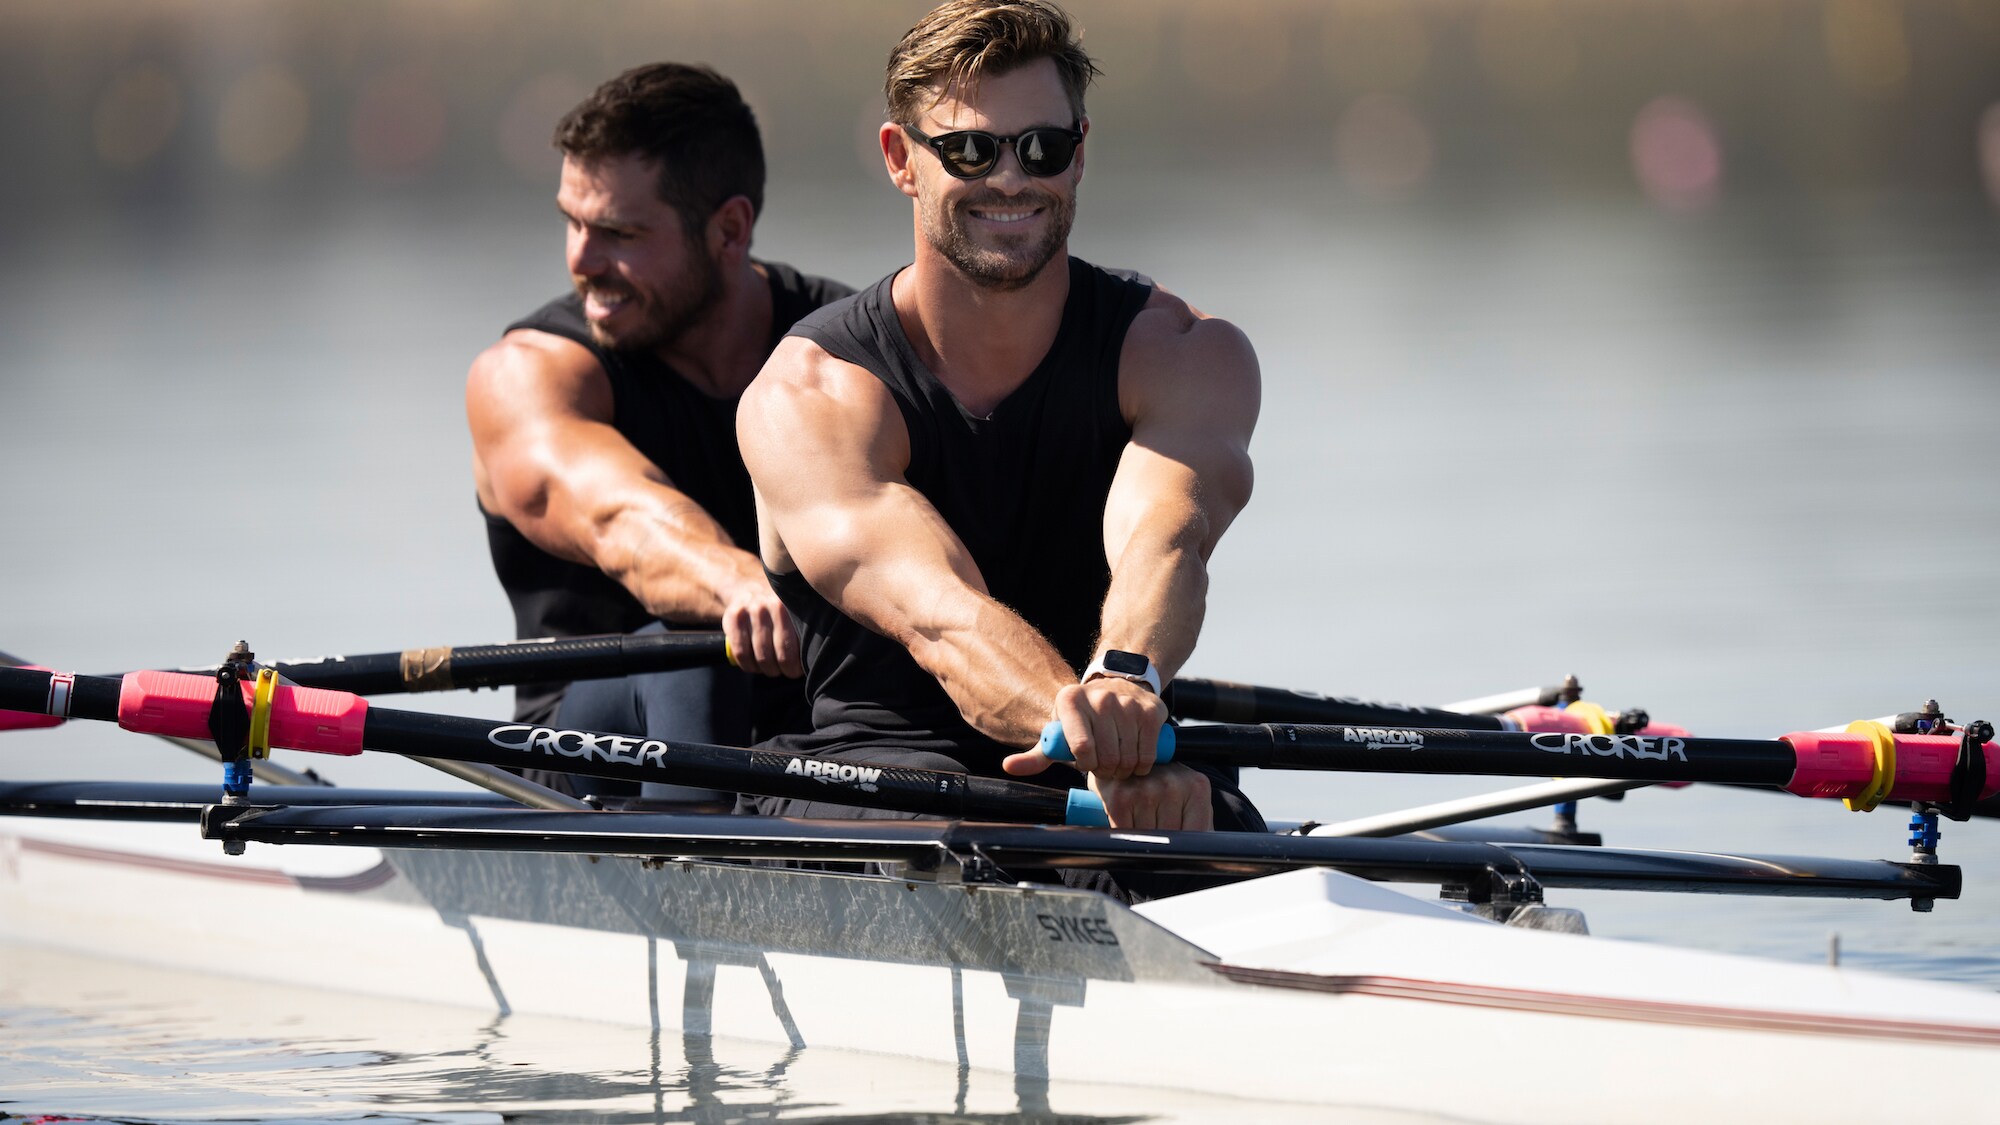 Chris Hemsworth smiles as he rows a boat. (National Geographic for Disney+/Craig Parry)